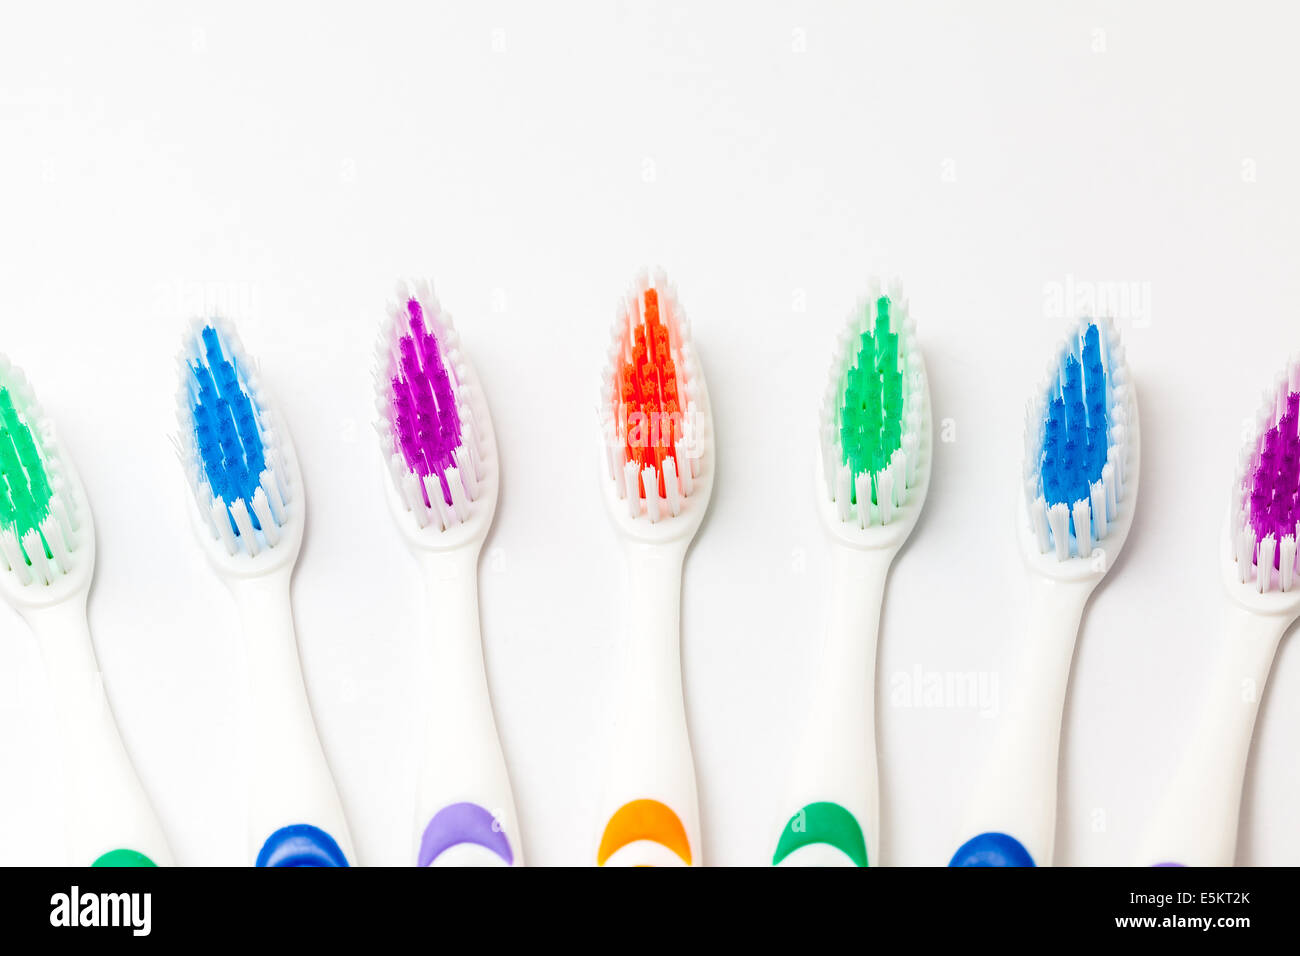 different colored plastic toothbrushes with white background Stock Photo